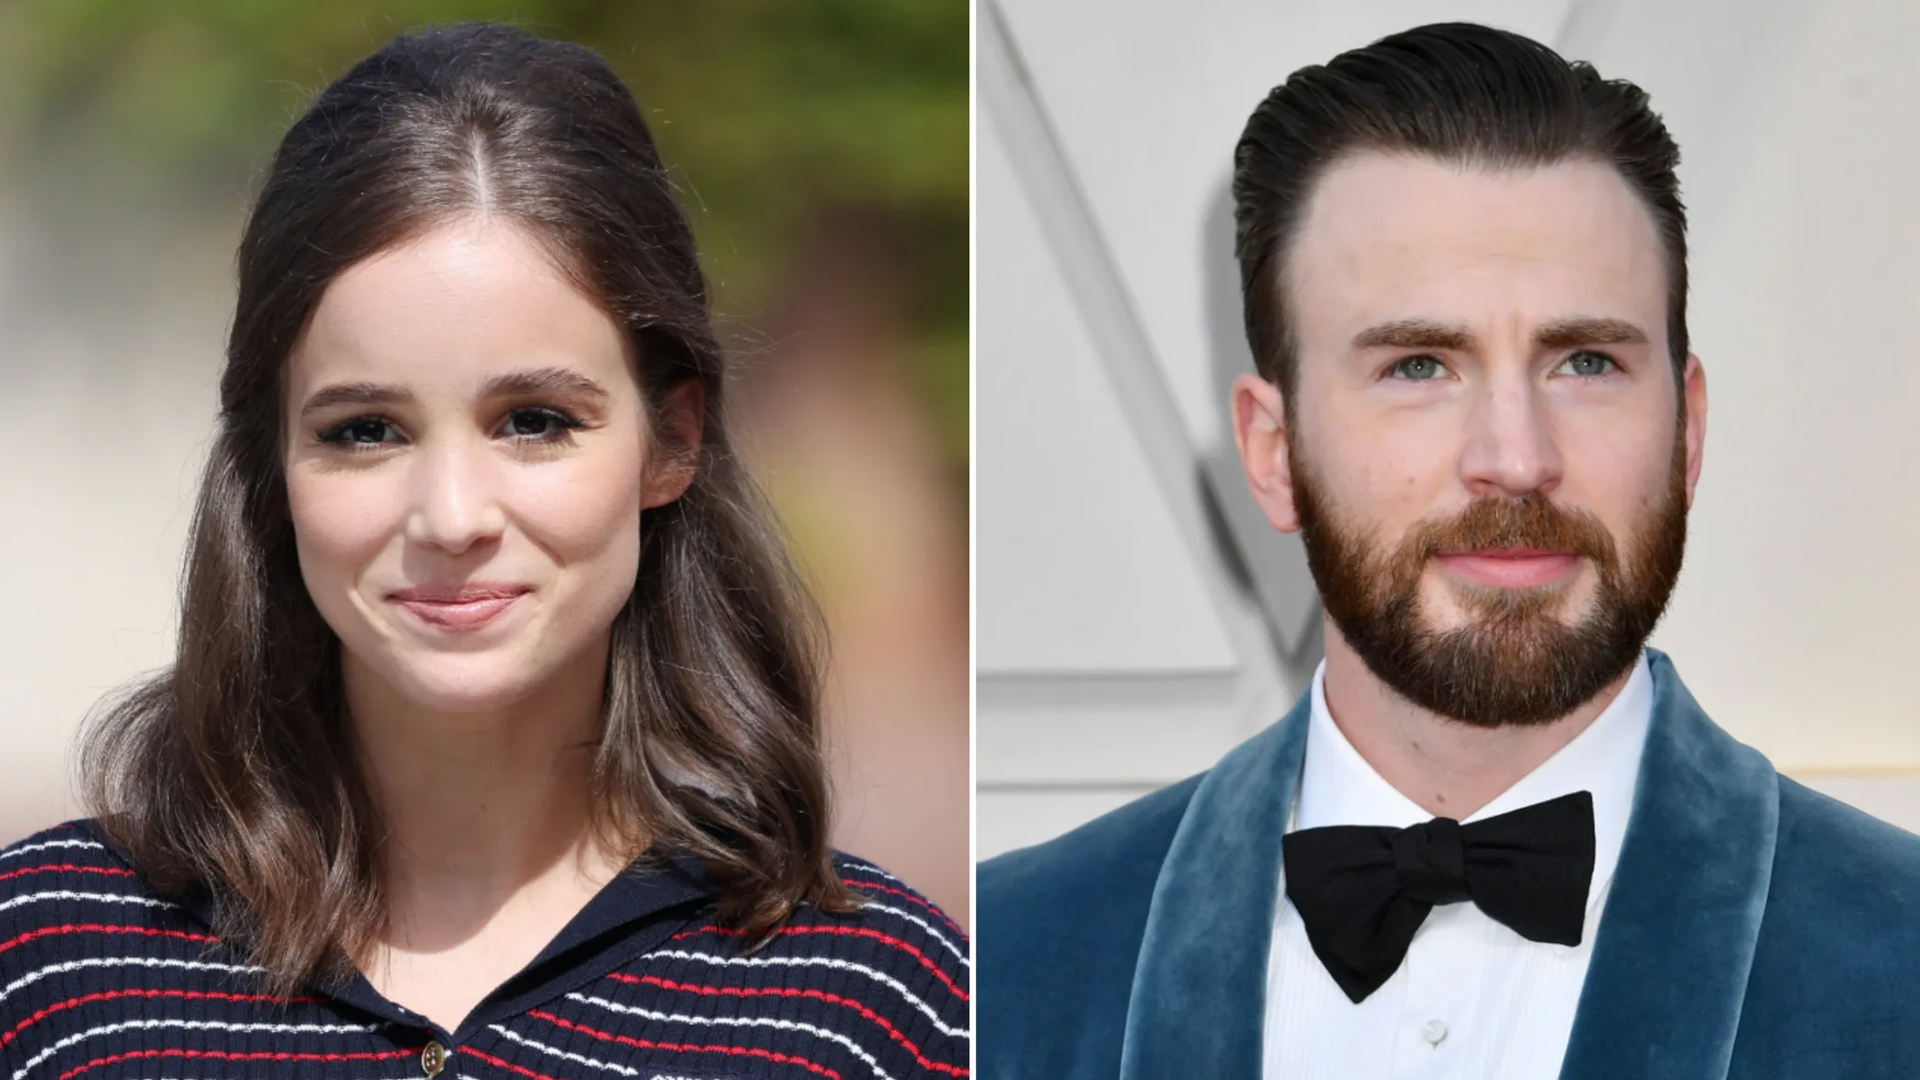 Chris Evans Marries Alba Baptista In a Private Wedding!